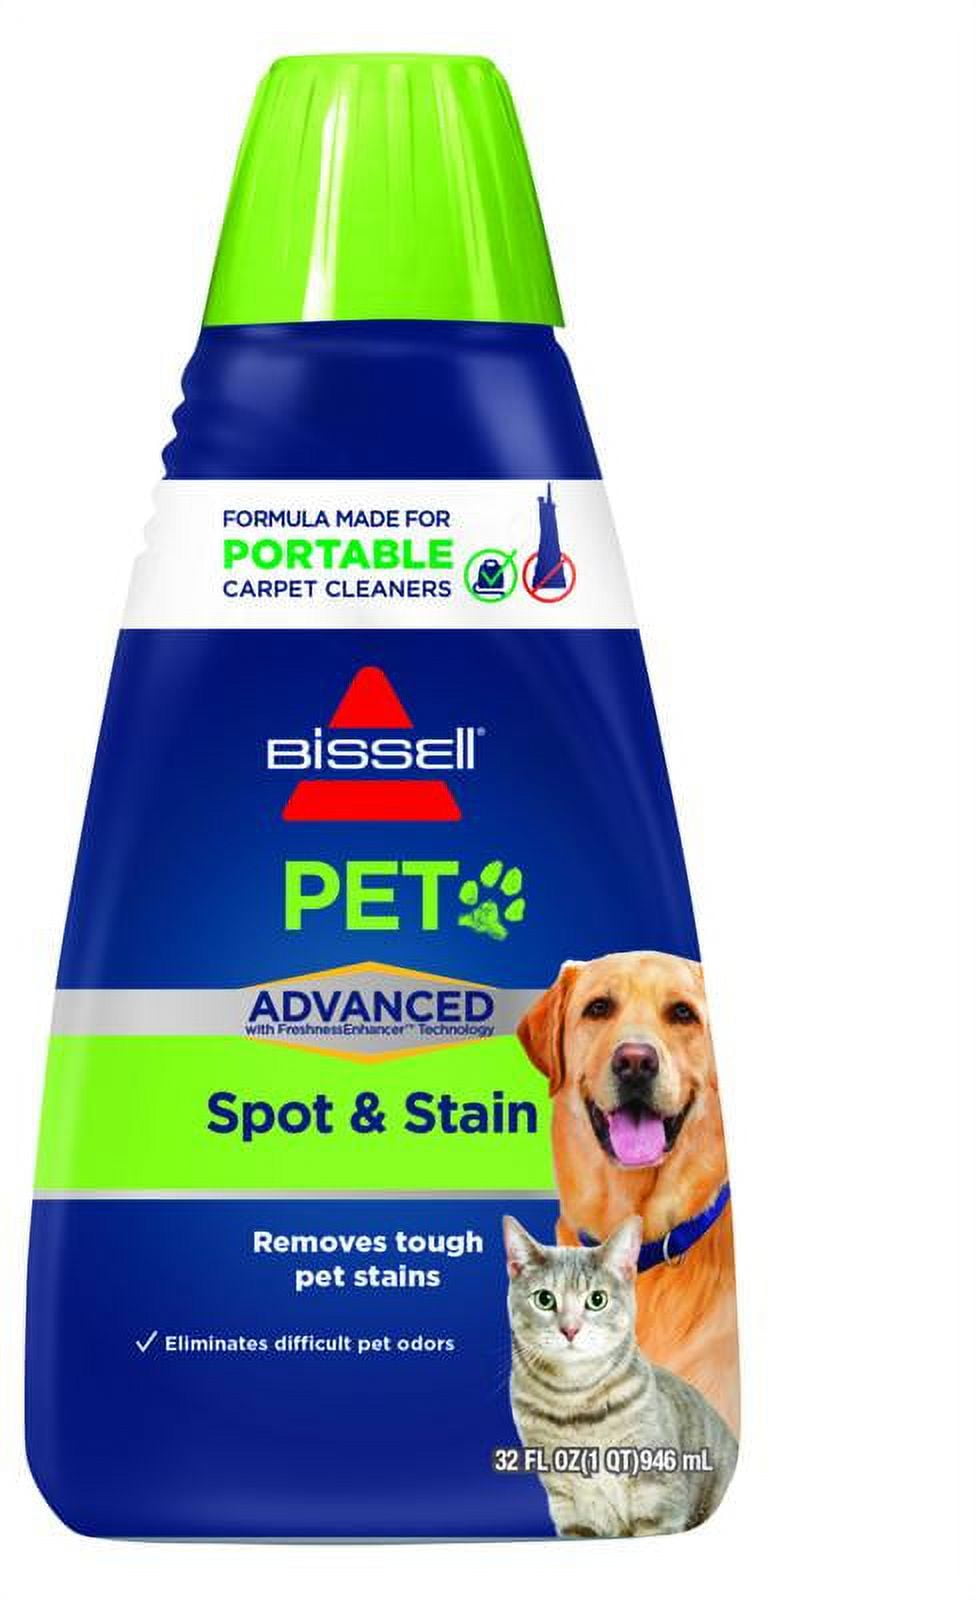 BISSELL Pet Stain Odor Remover, 32 Fluid Ounce 74R7V 